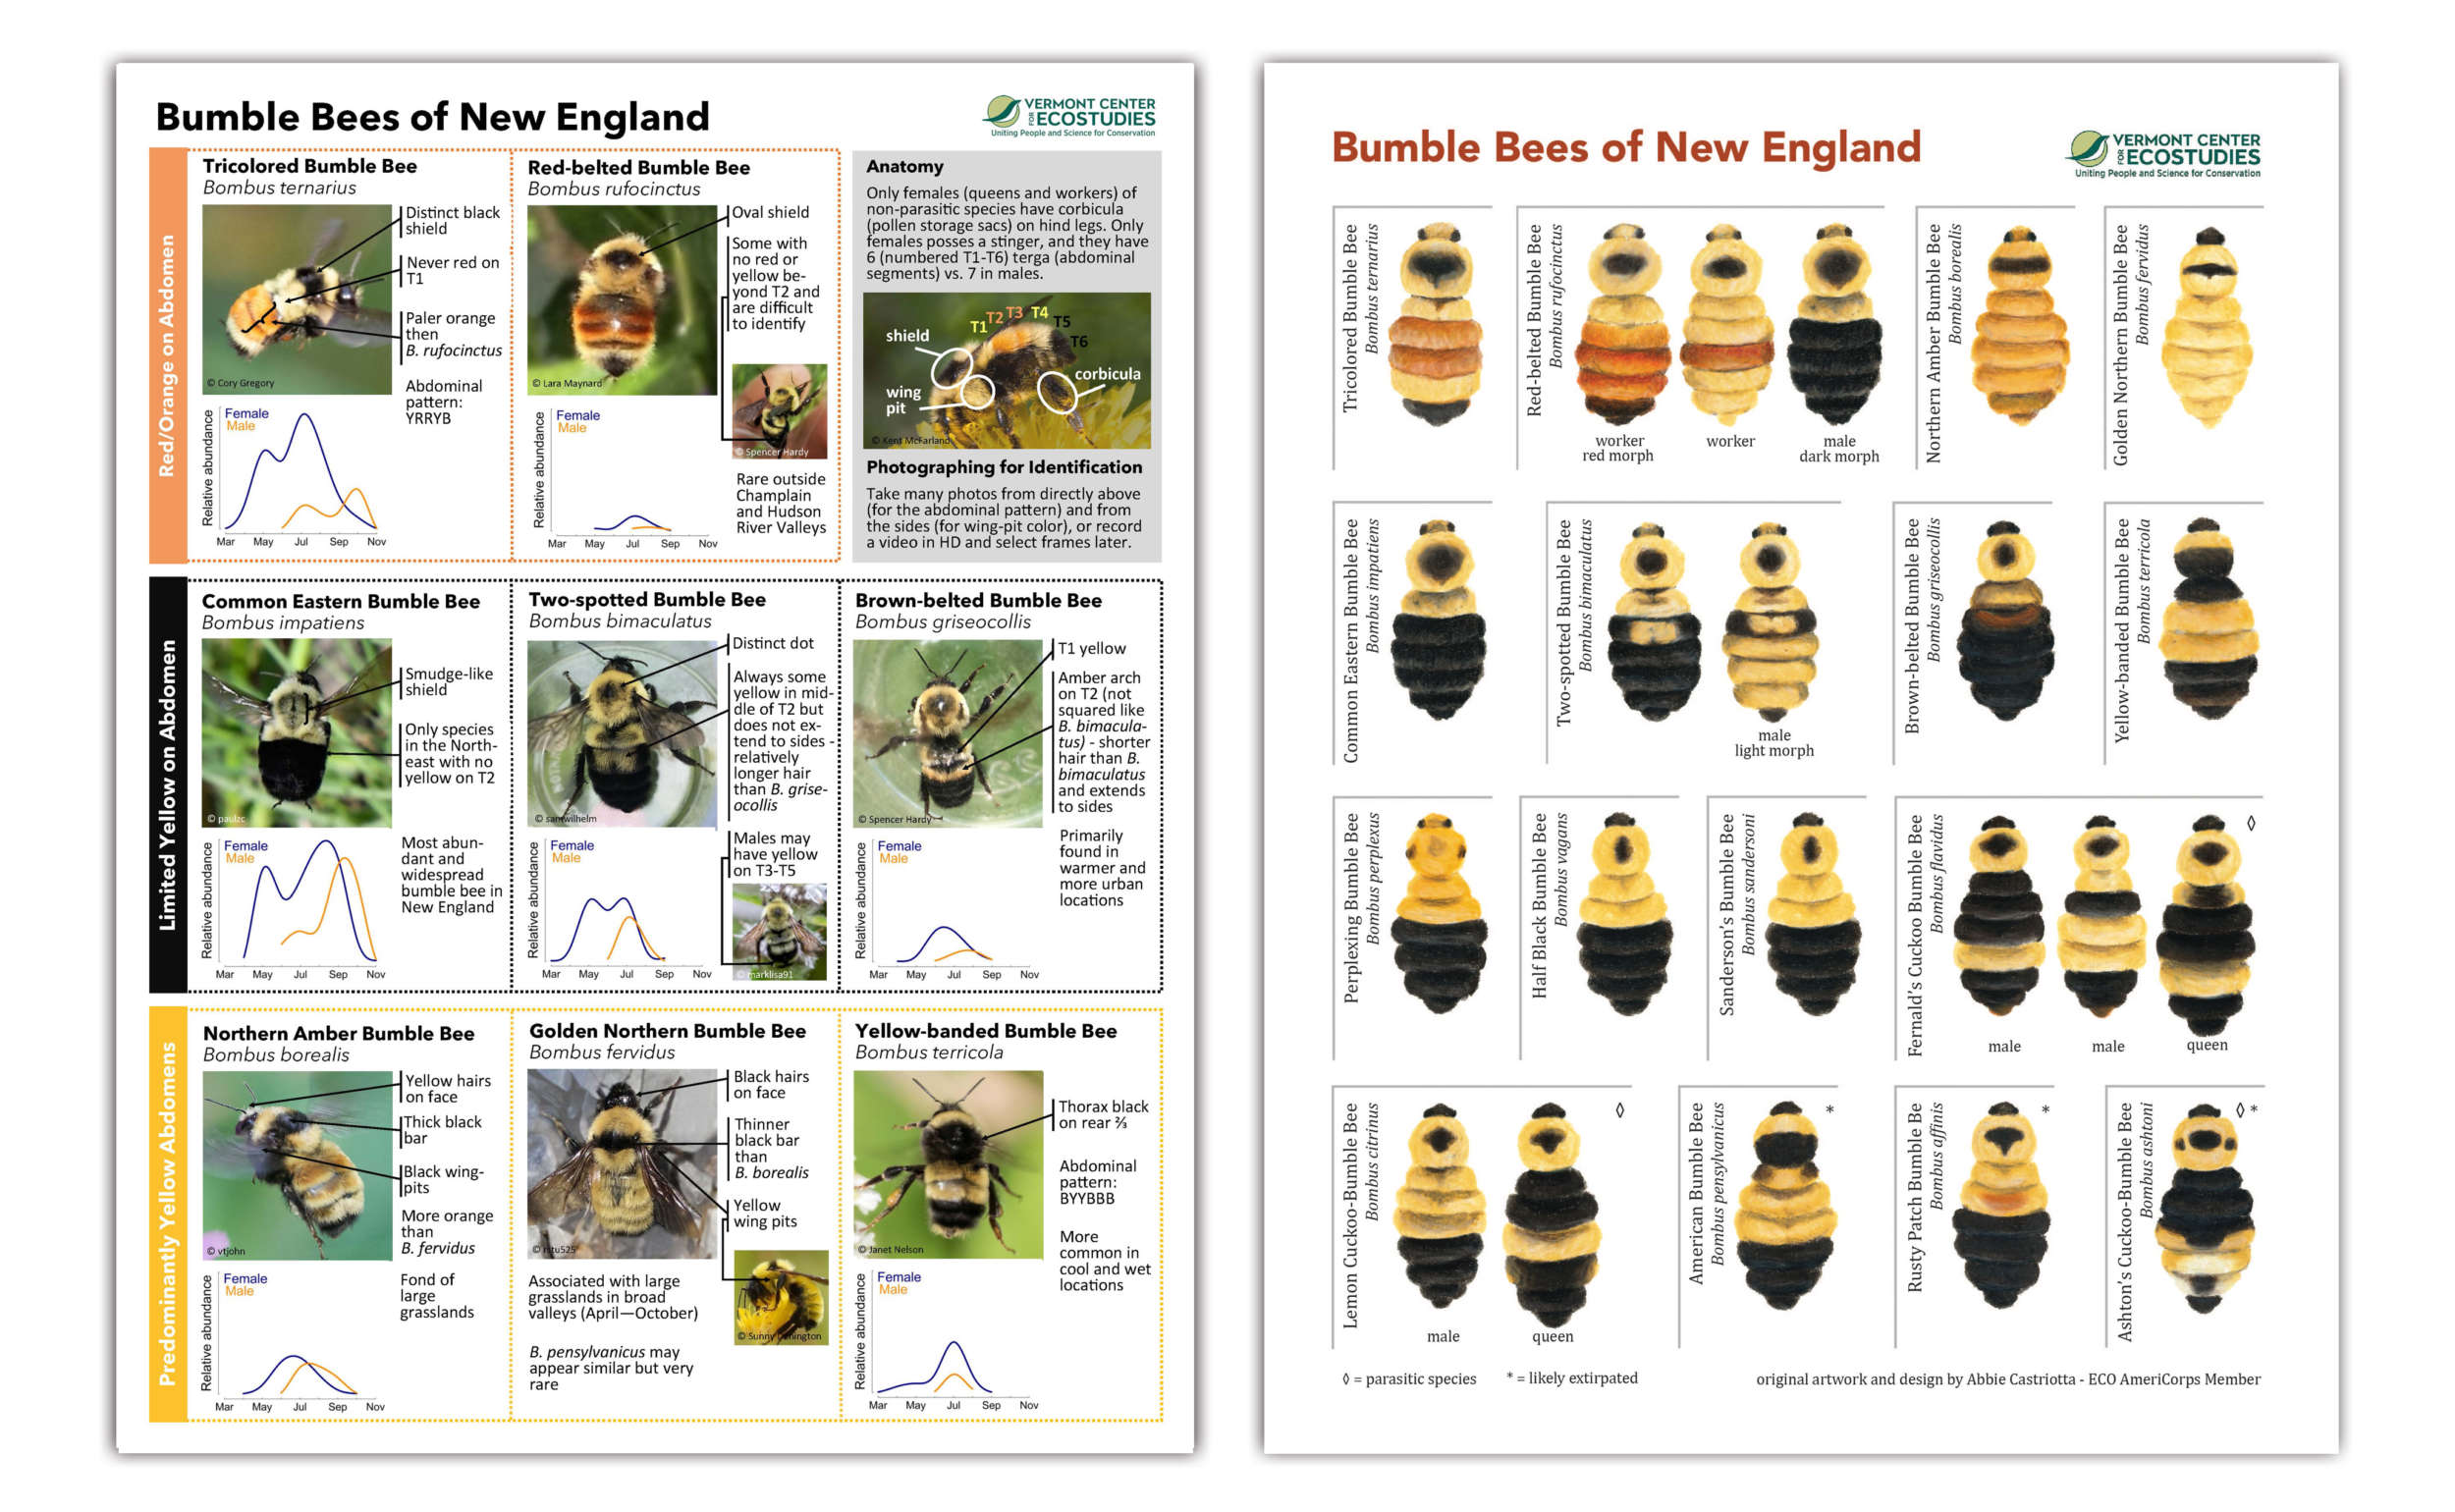 Bumble Bees of New England Guide